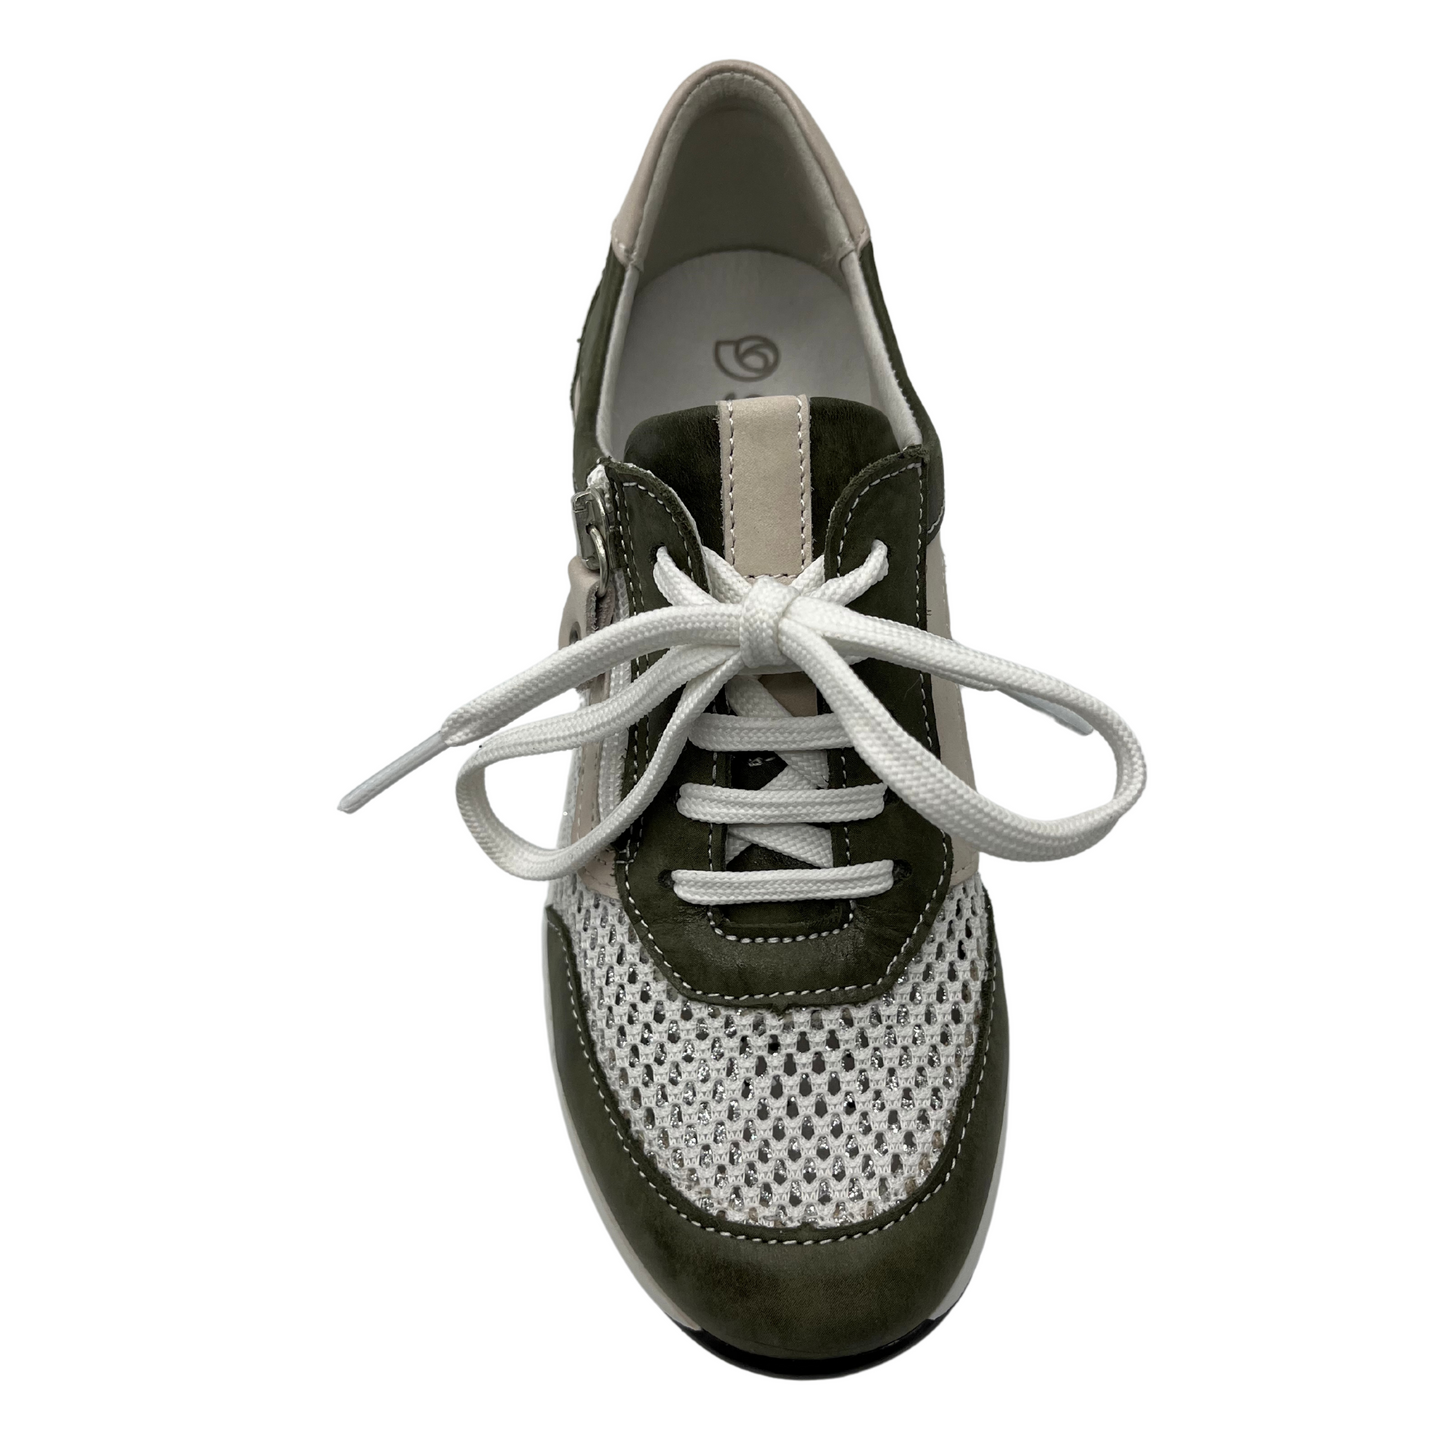 Top view of women's wedge sneaker with mesh panel, white laces and side zipper